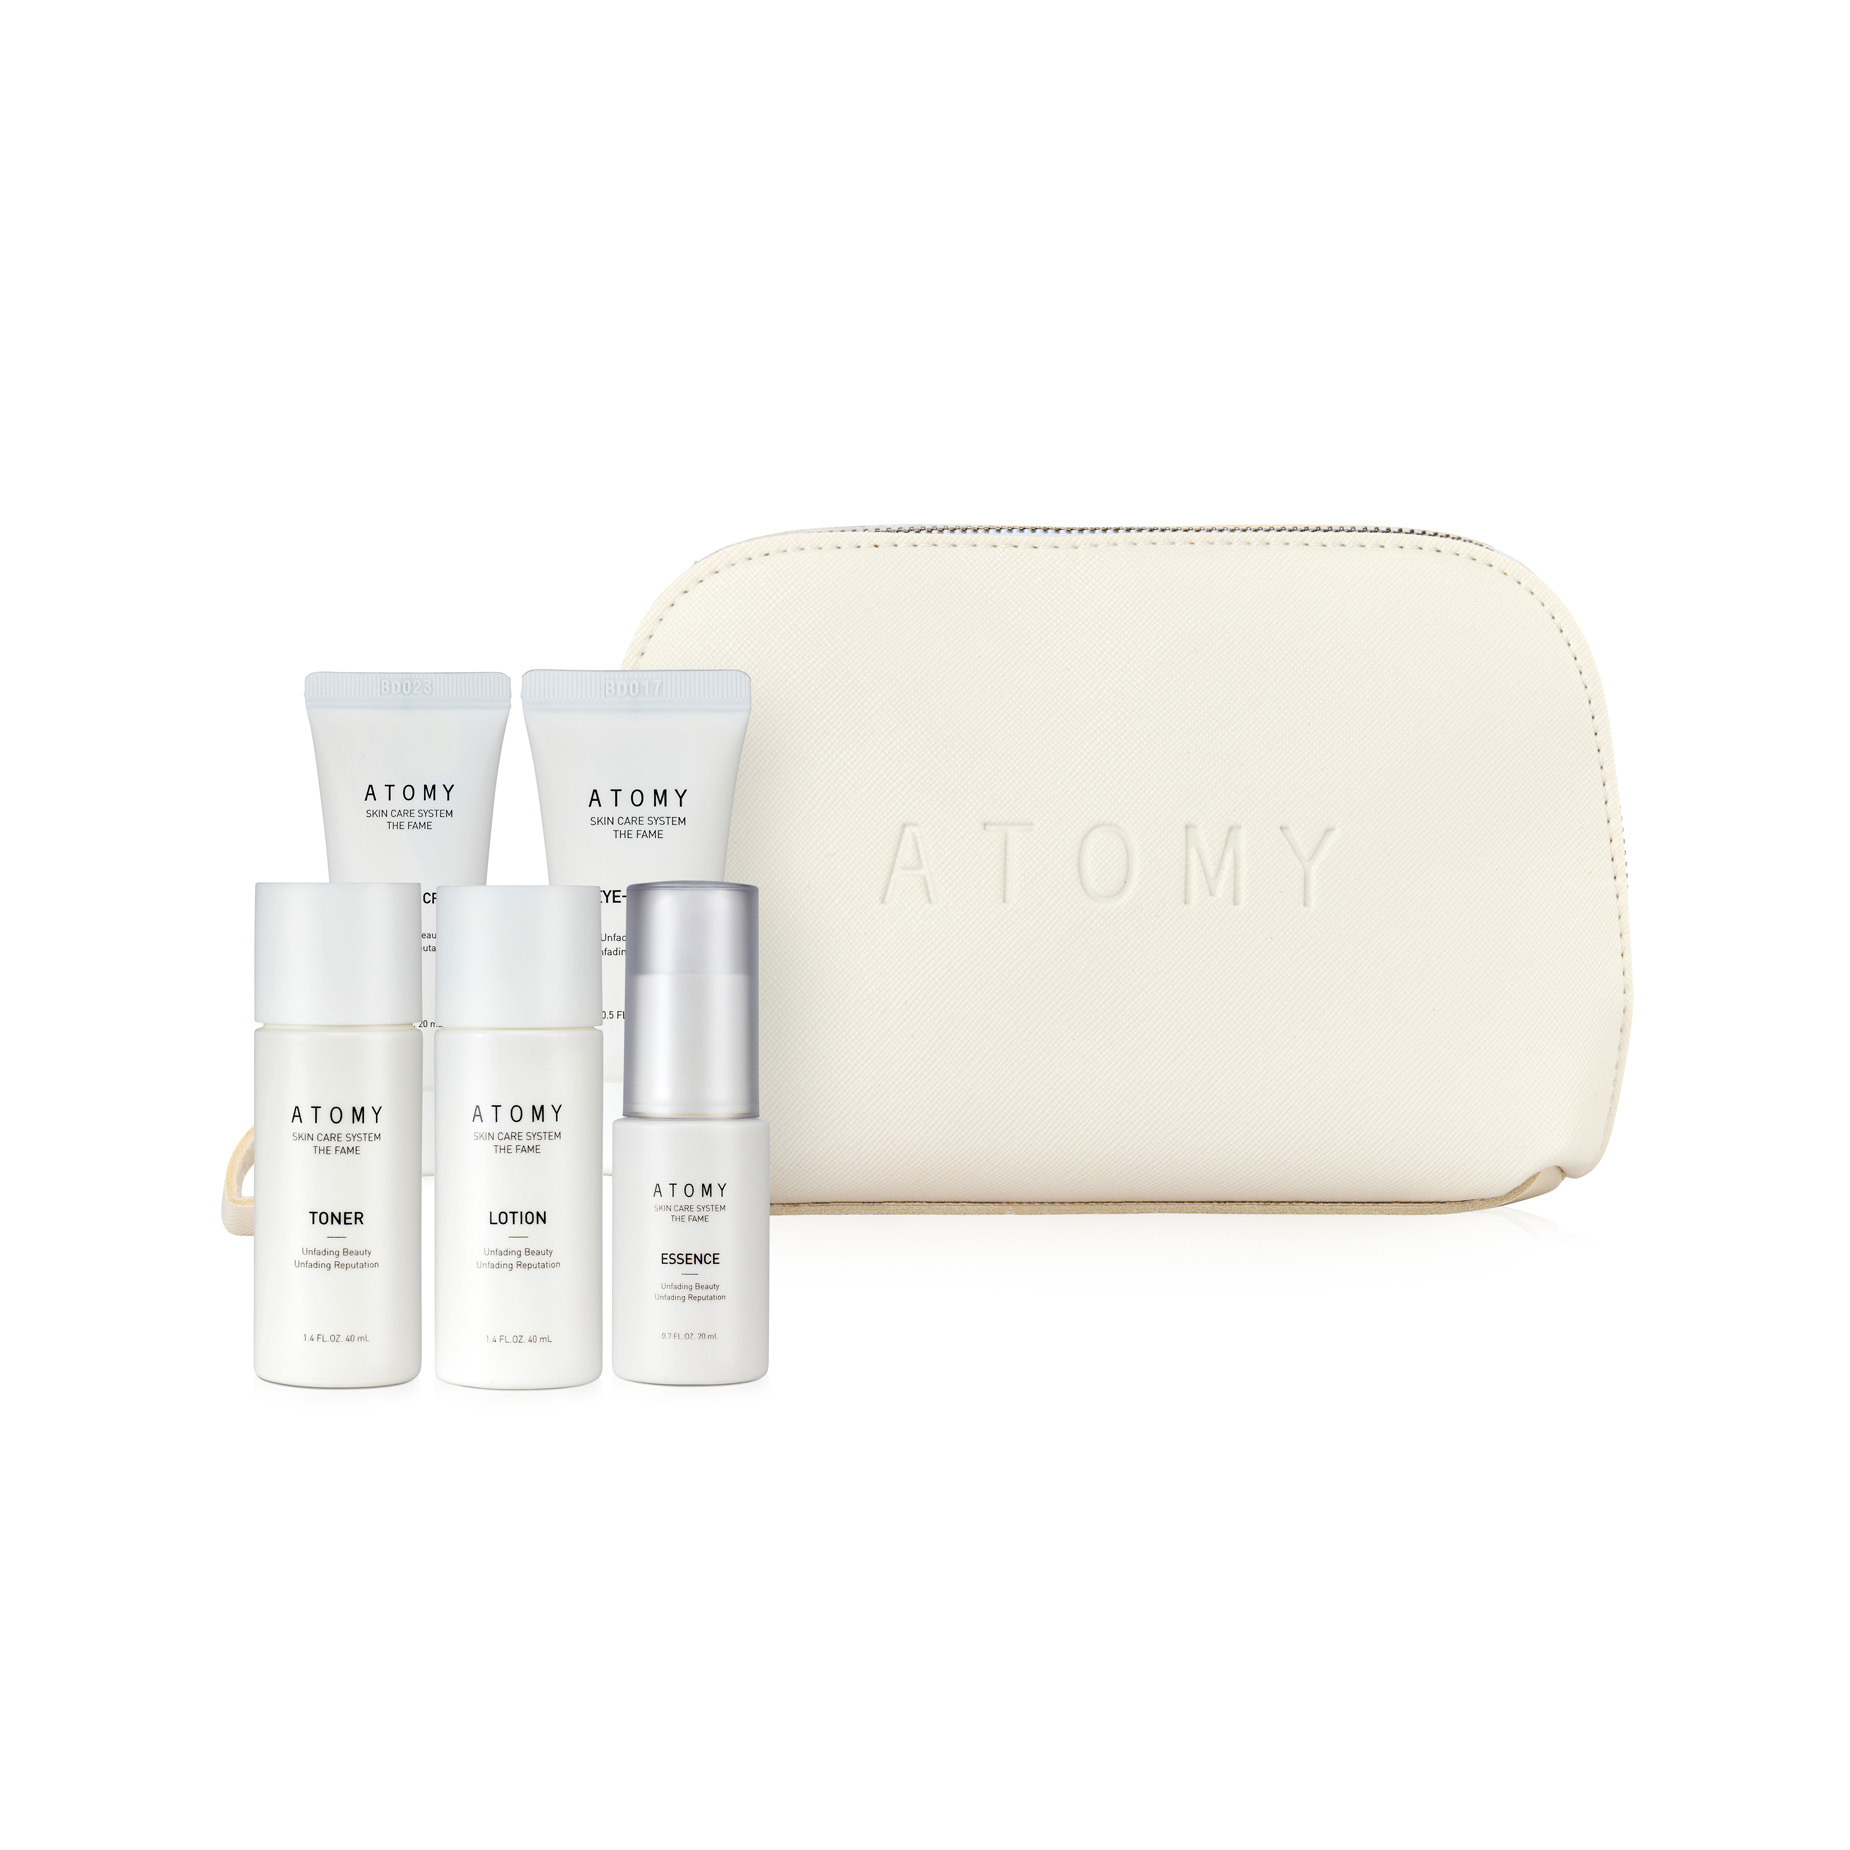 The Fame Travel Kit | Atomy Colombia